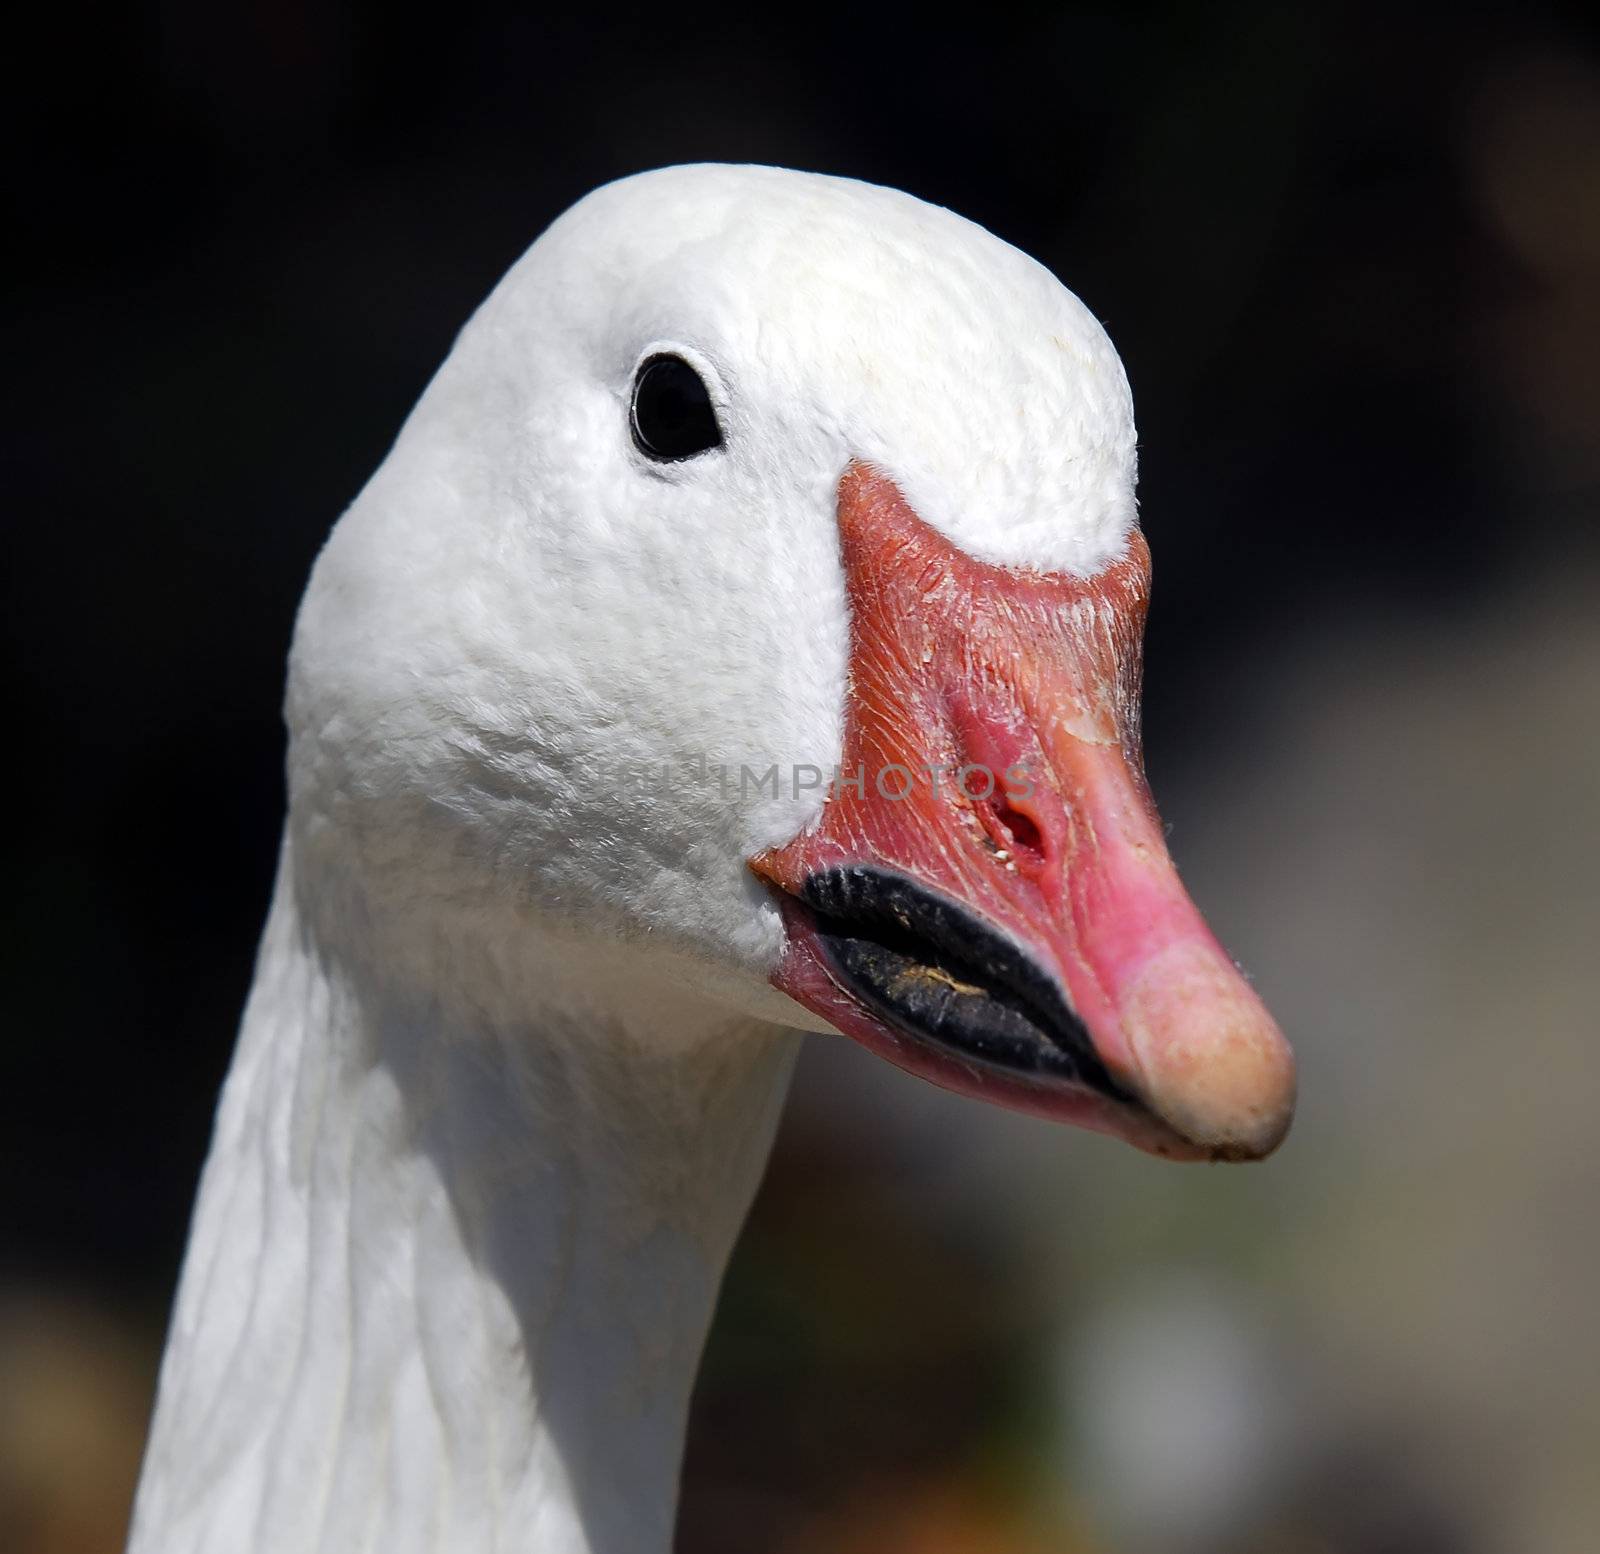 Portrait of a white goose with afunny beak